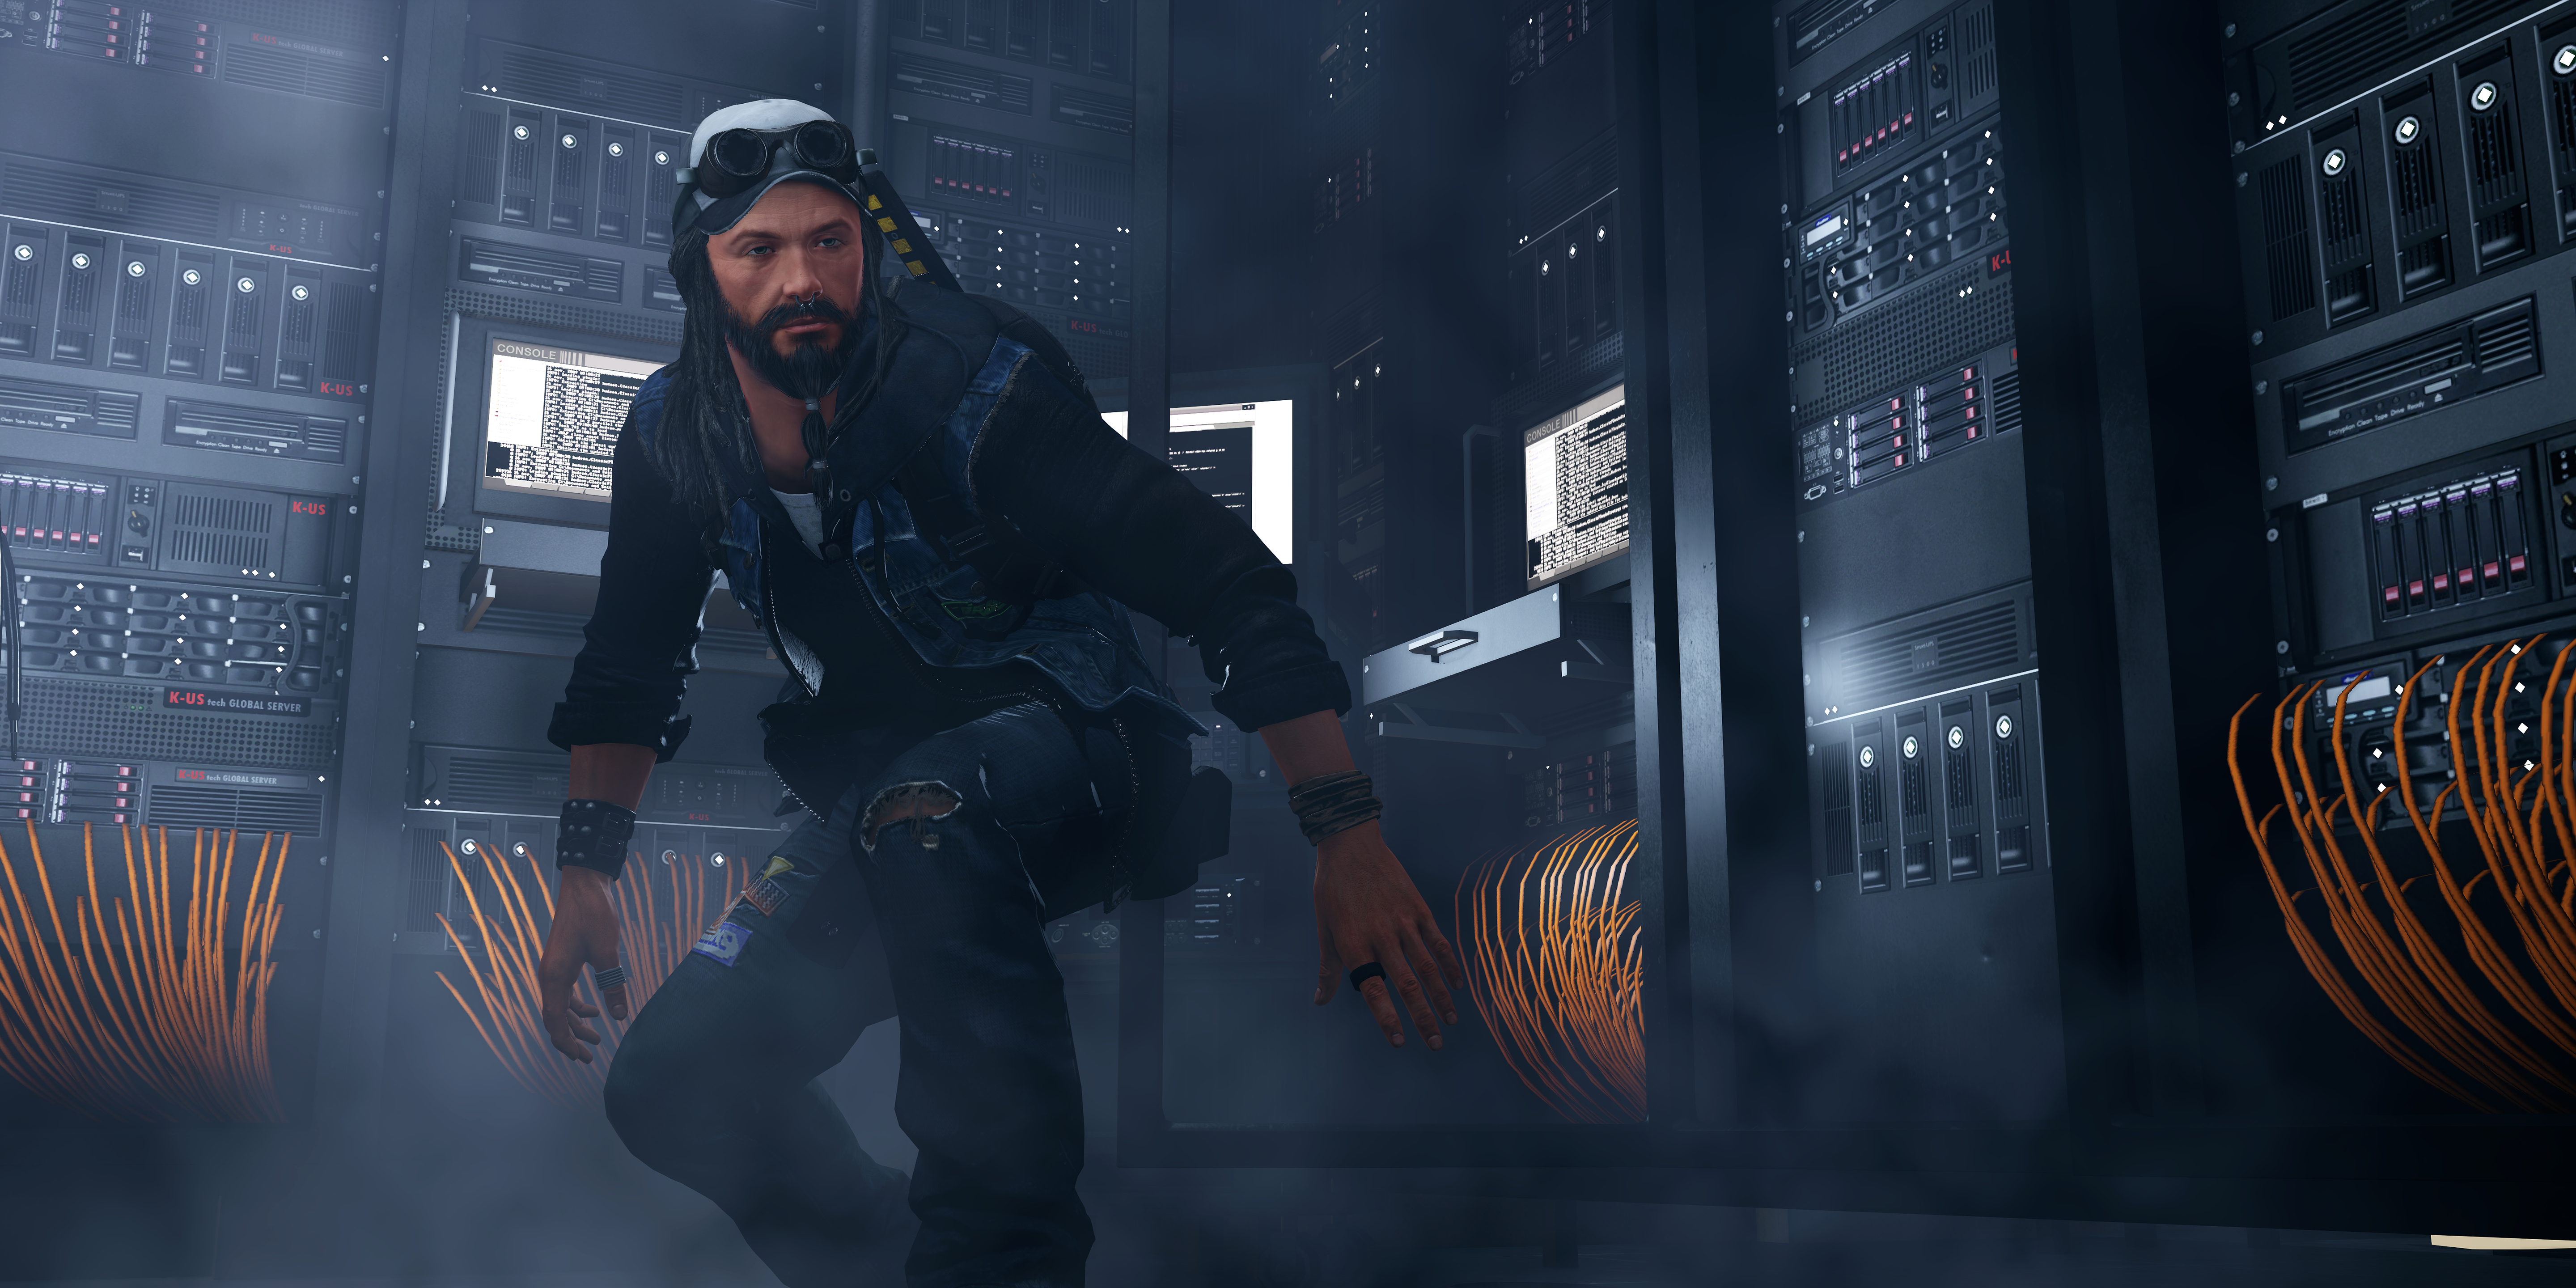 Watch_Dogs - Bad Blood on Steam